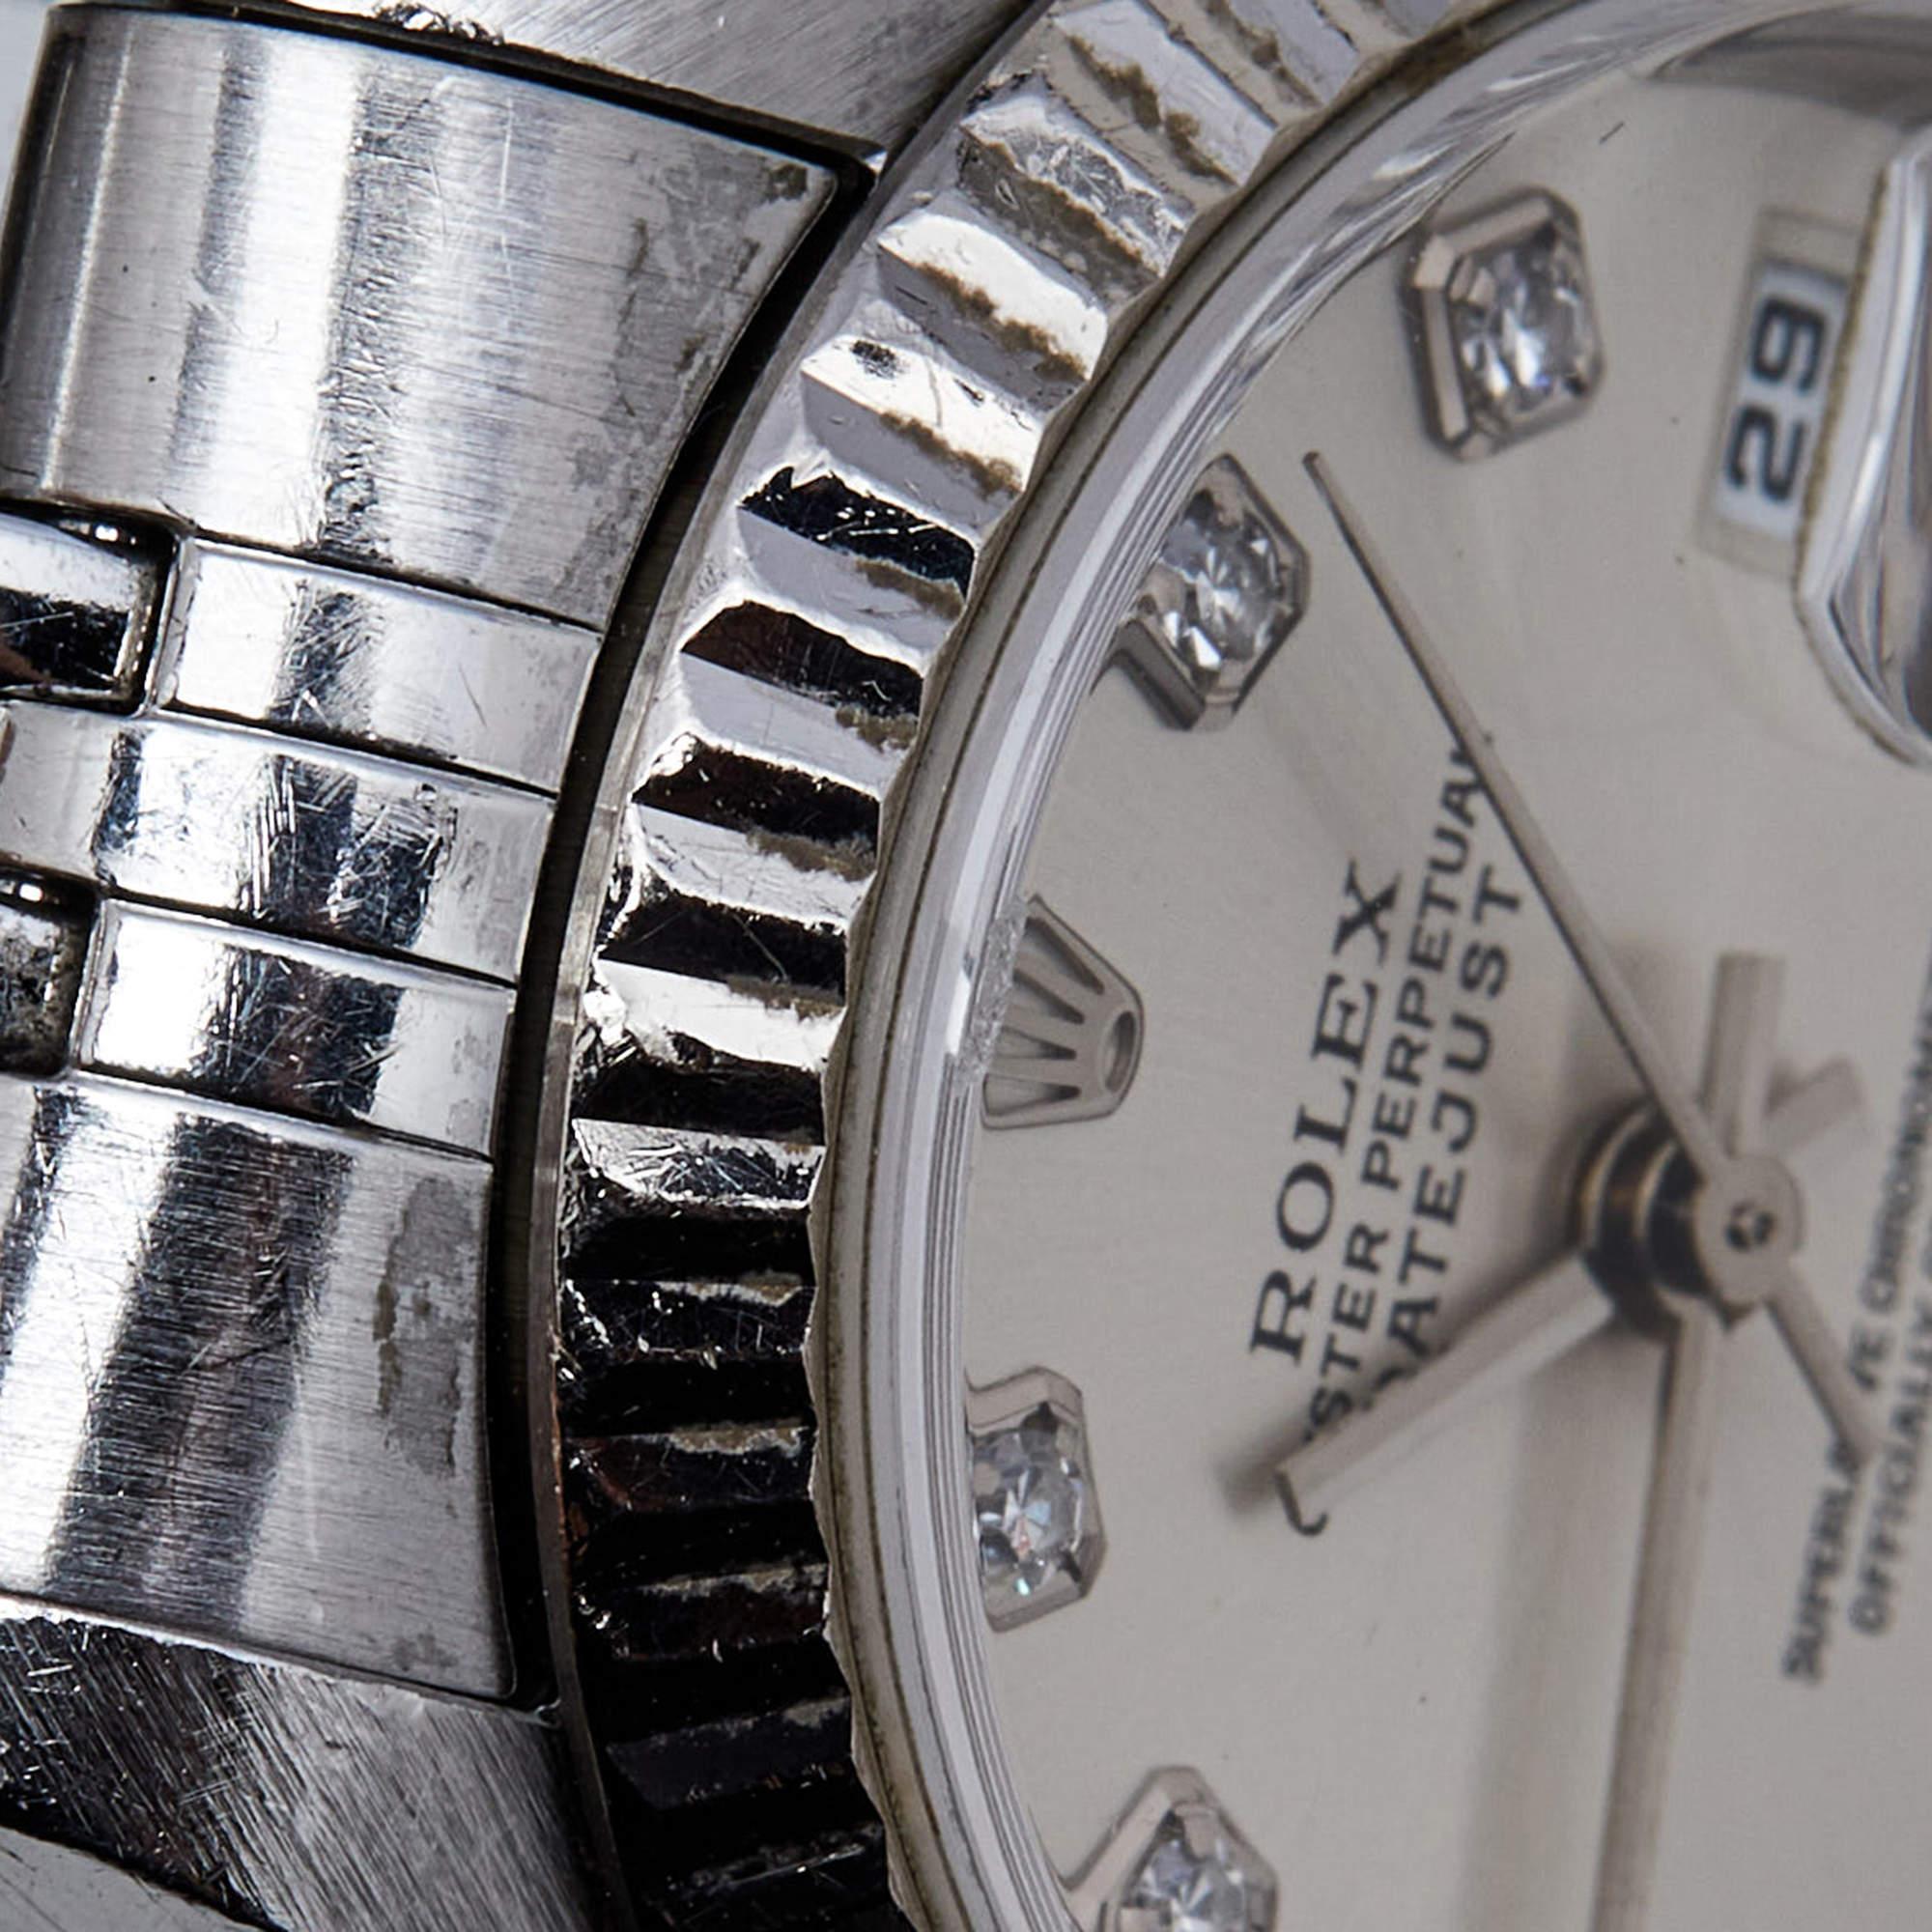 The Datejust is one of the most recognized and coveted watches from the house of Rolex. It has a distinct look and an irrefutable appeal. Crafted in stainless steel and 18k white gold, this authentic Rolex Datejust wristwatch has the signature